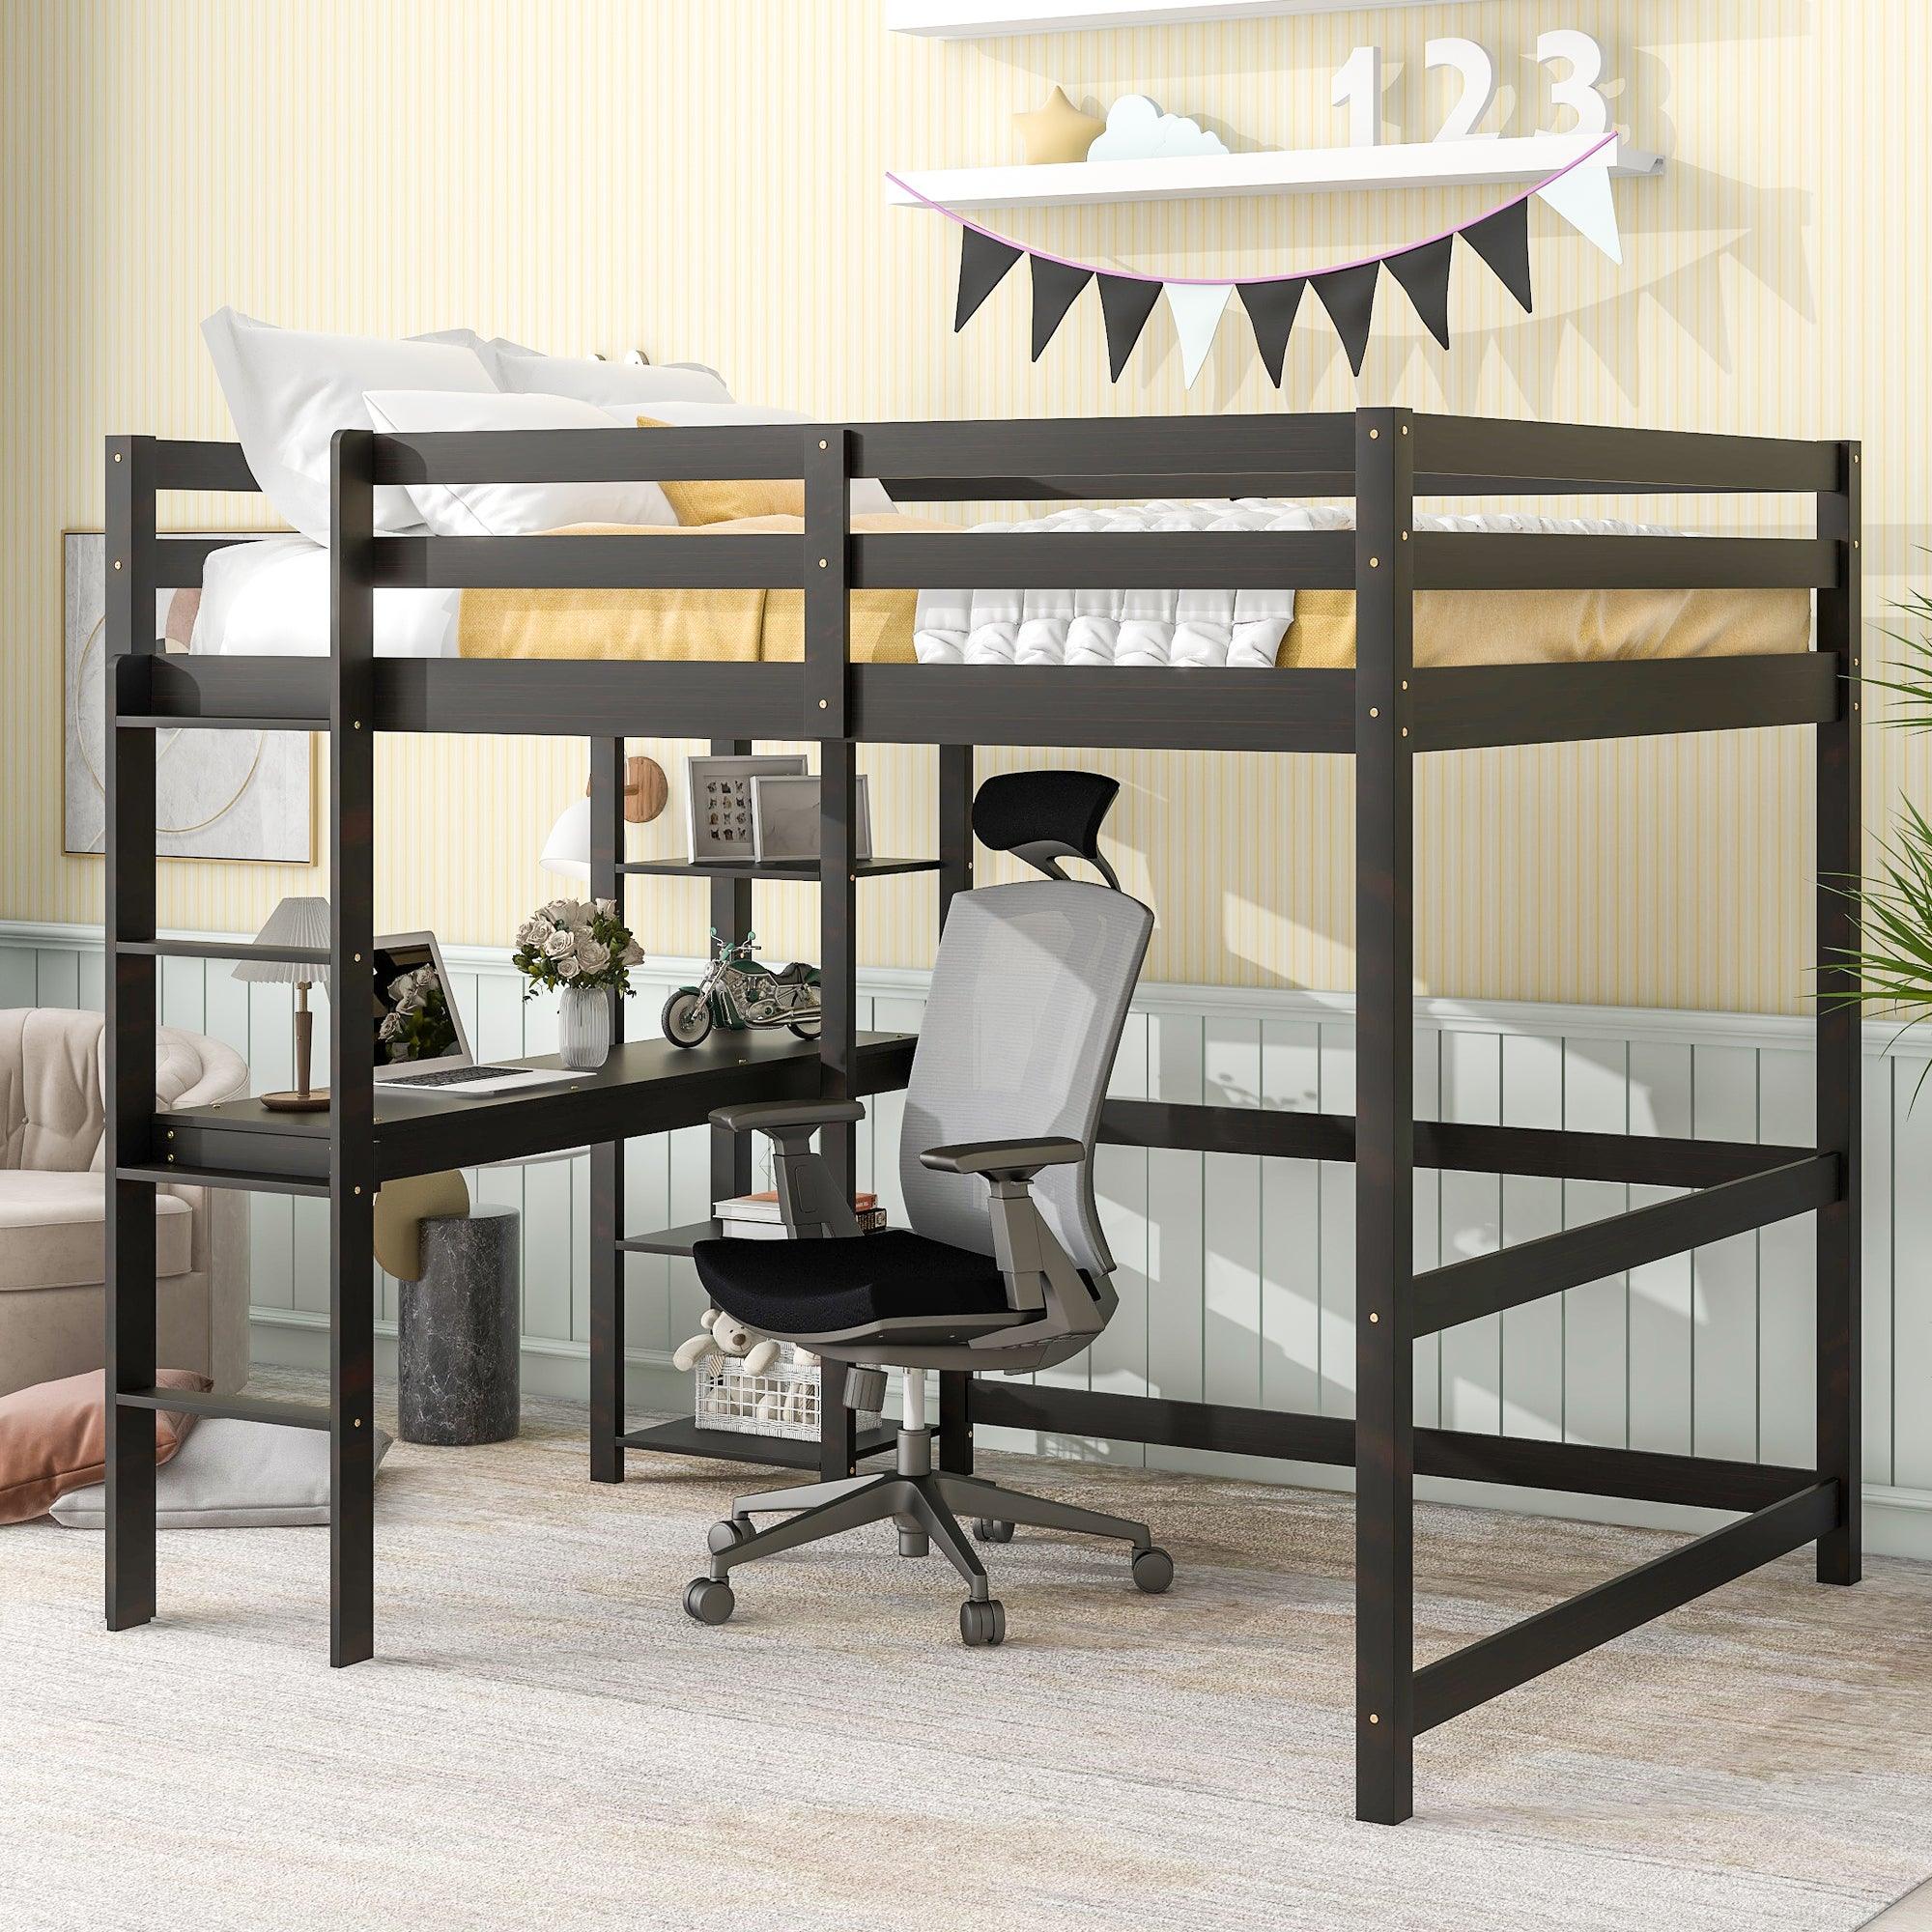 Full Loft Bed With Desk And Shelves, Perfect For Kids, Espresso